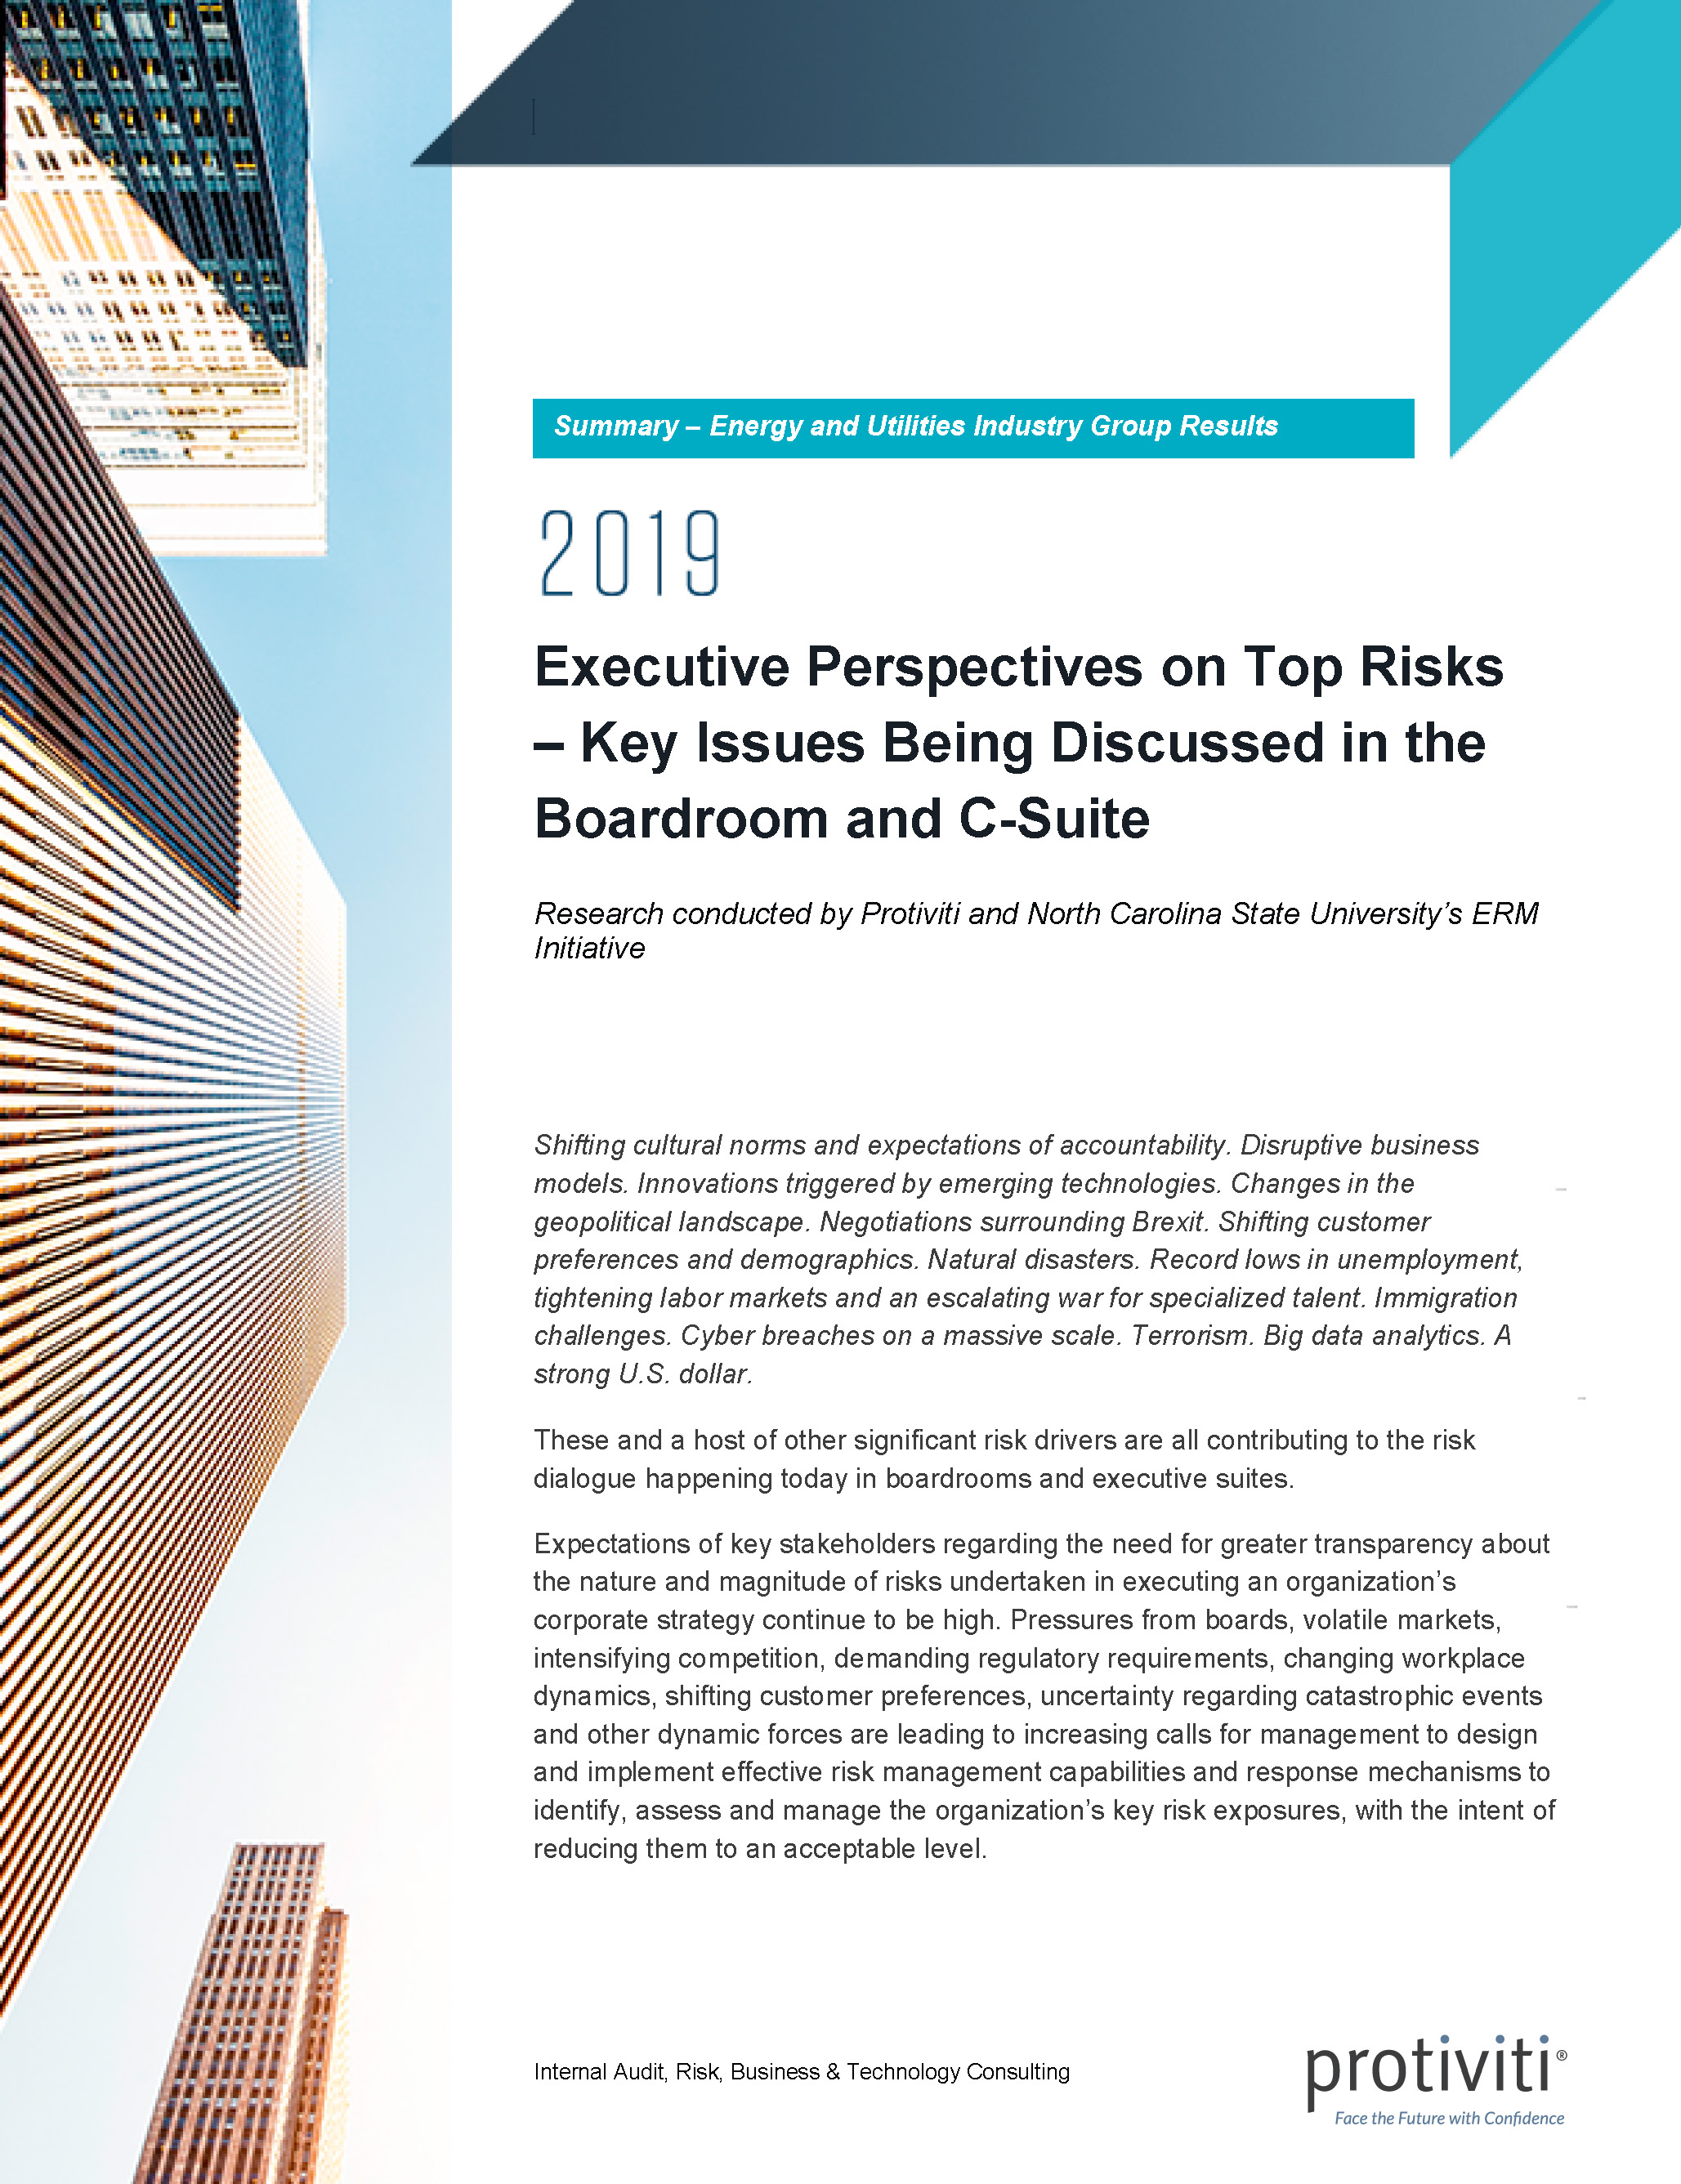 Screenshot of the first page of Executive Perspectives on Top Risks in 2019 Energy and Utilities Industry Group Results